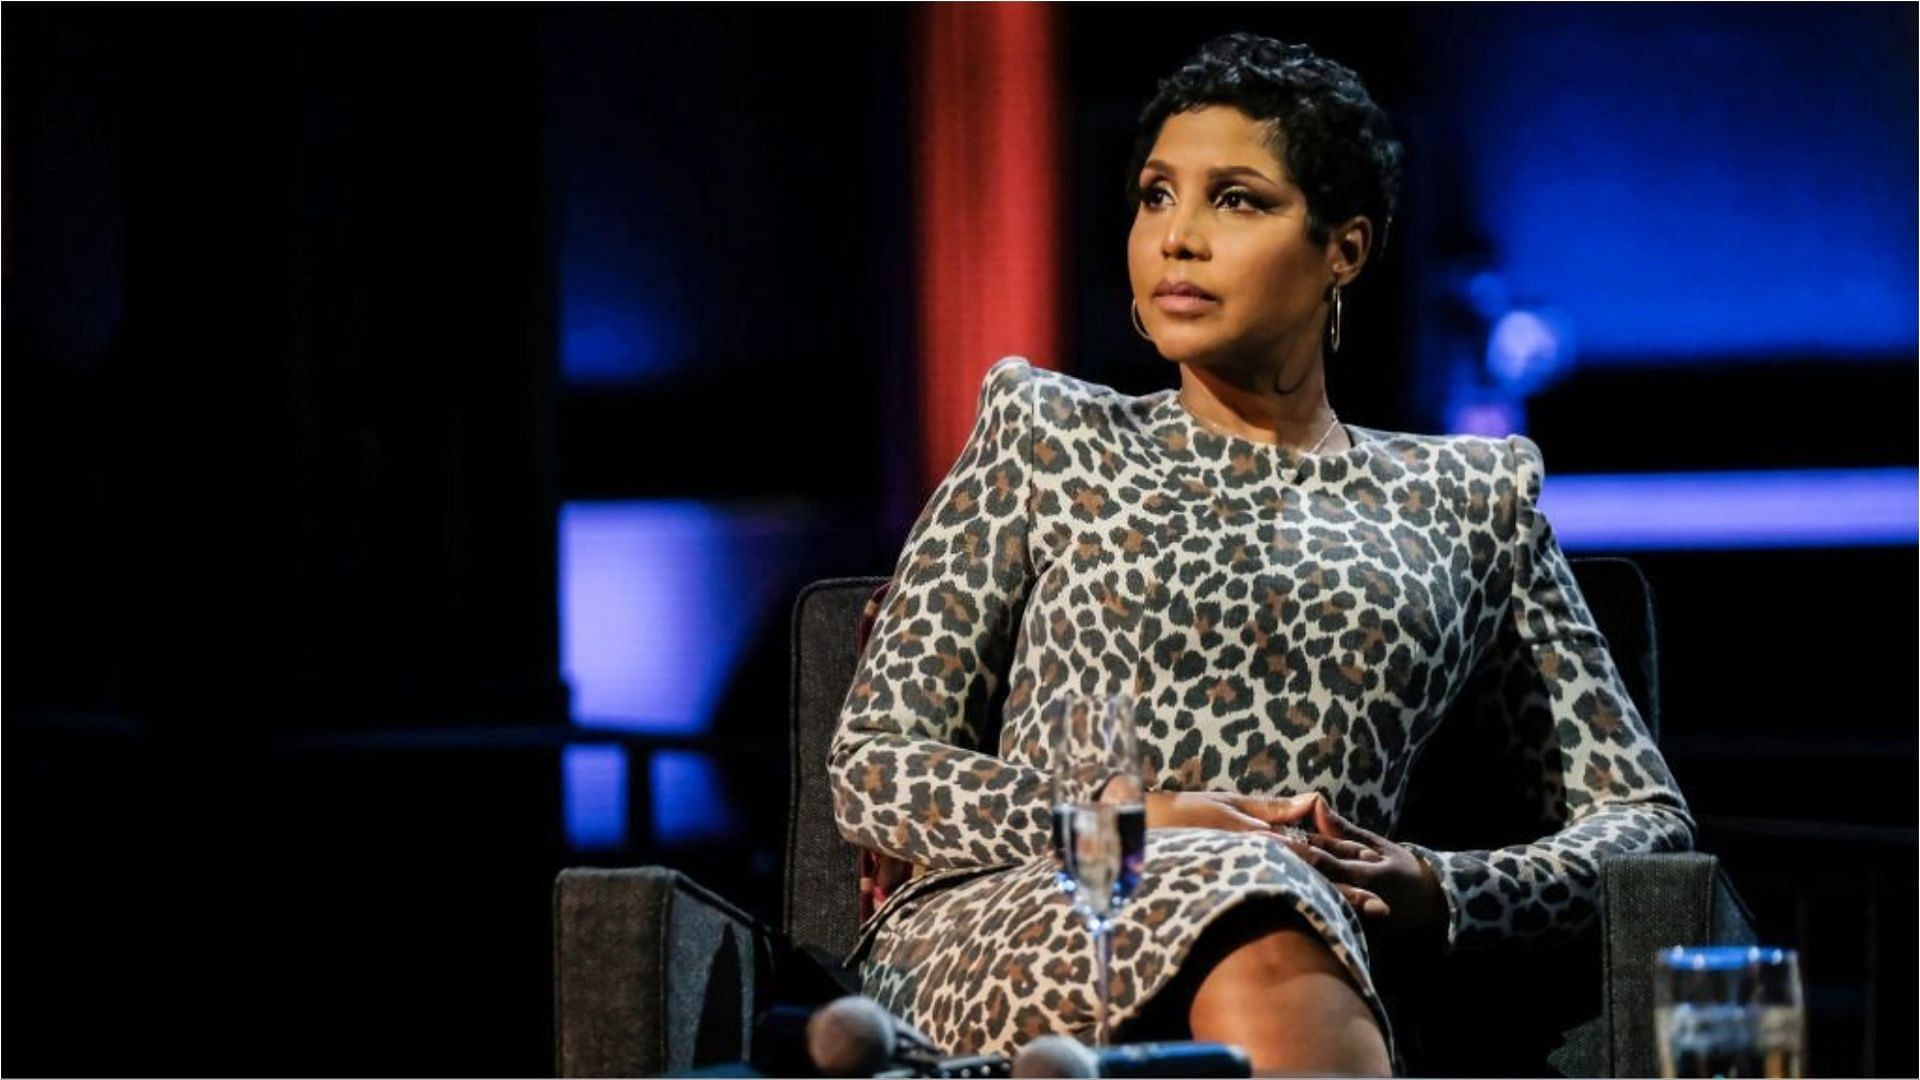 Toni Braxton&#039;s diagnosis with lupus was disclosed in 2010 (Image via John Fleenor/Getty Images)